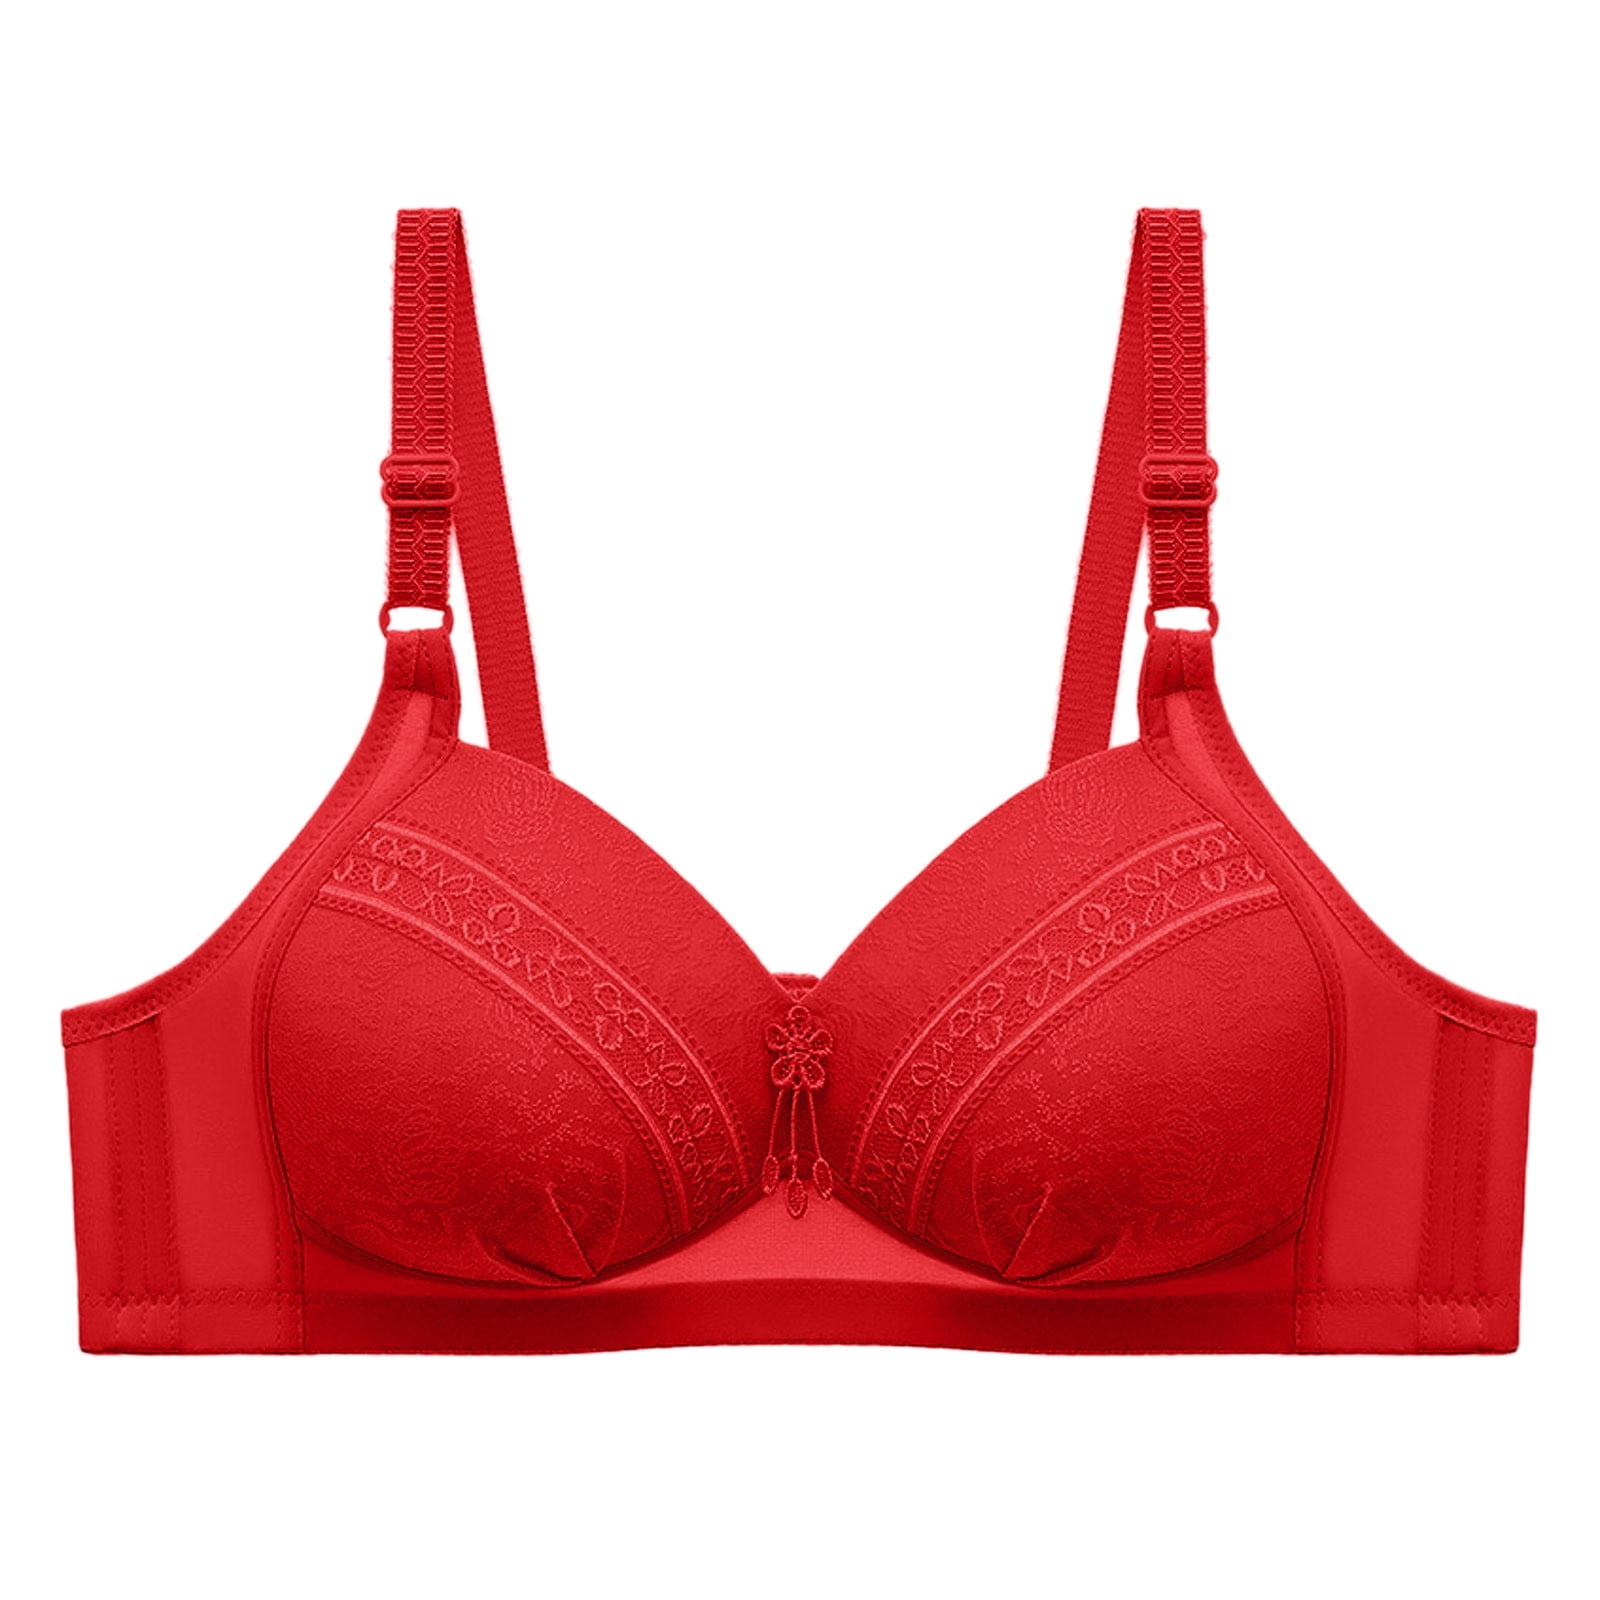 Fitness & Beauty – tagged ifg comfort bra – Intimate Fashions